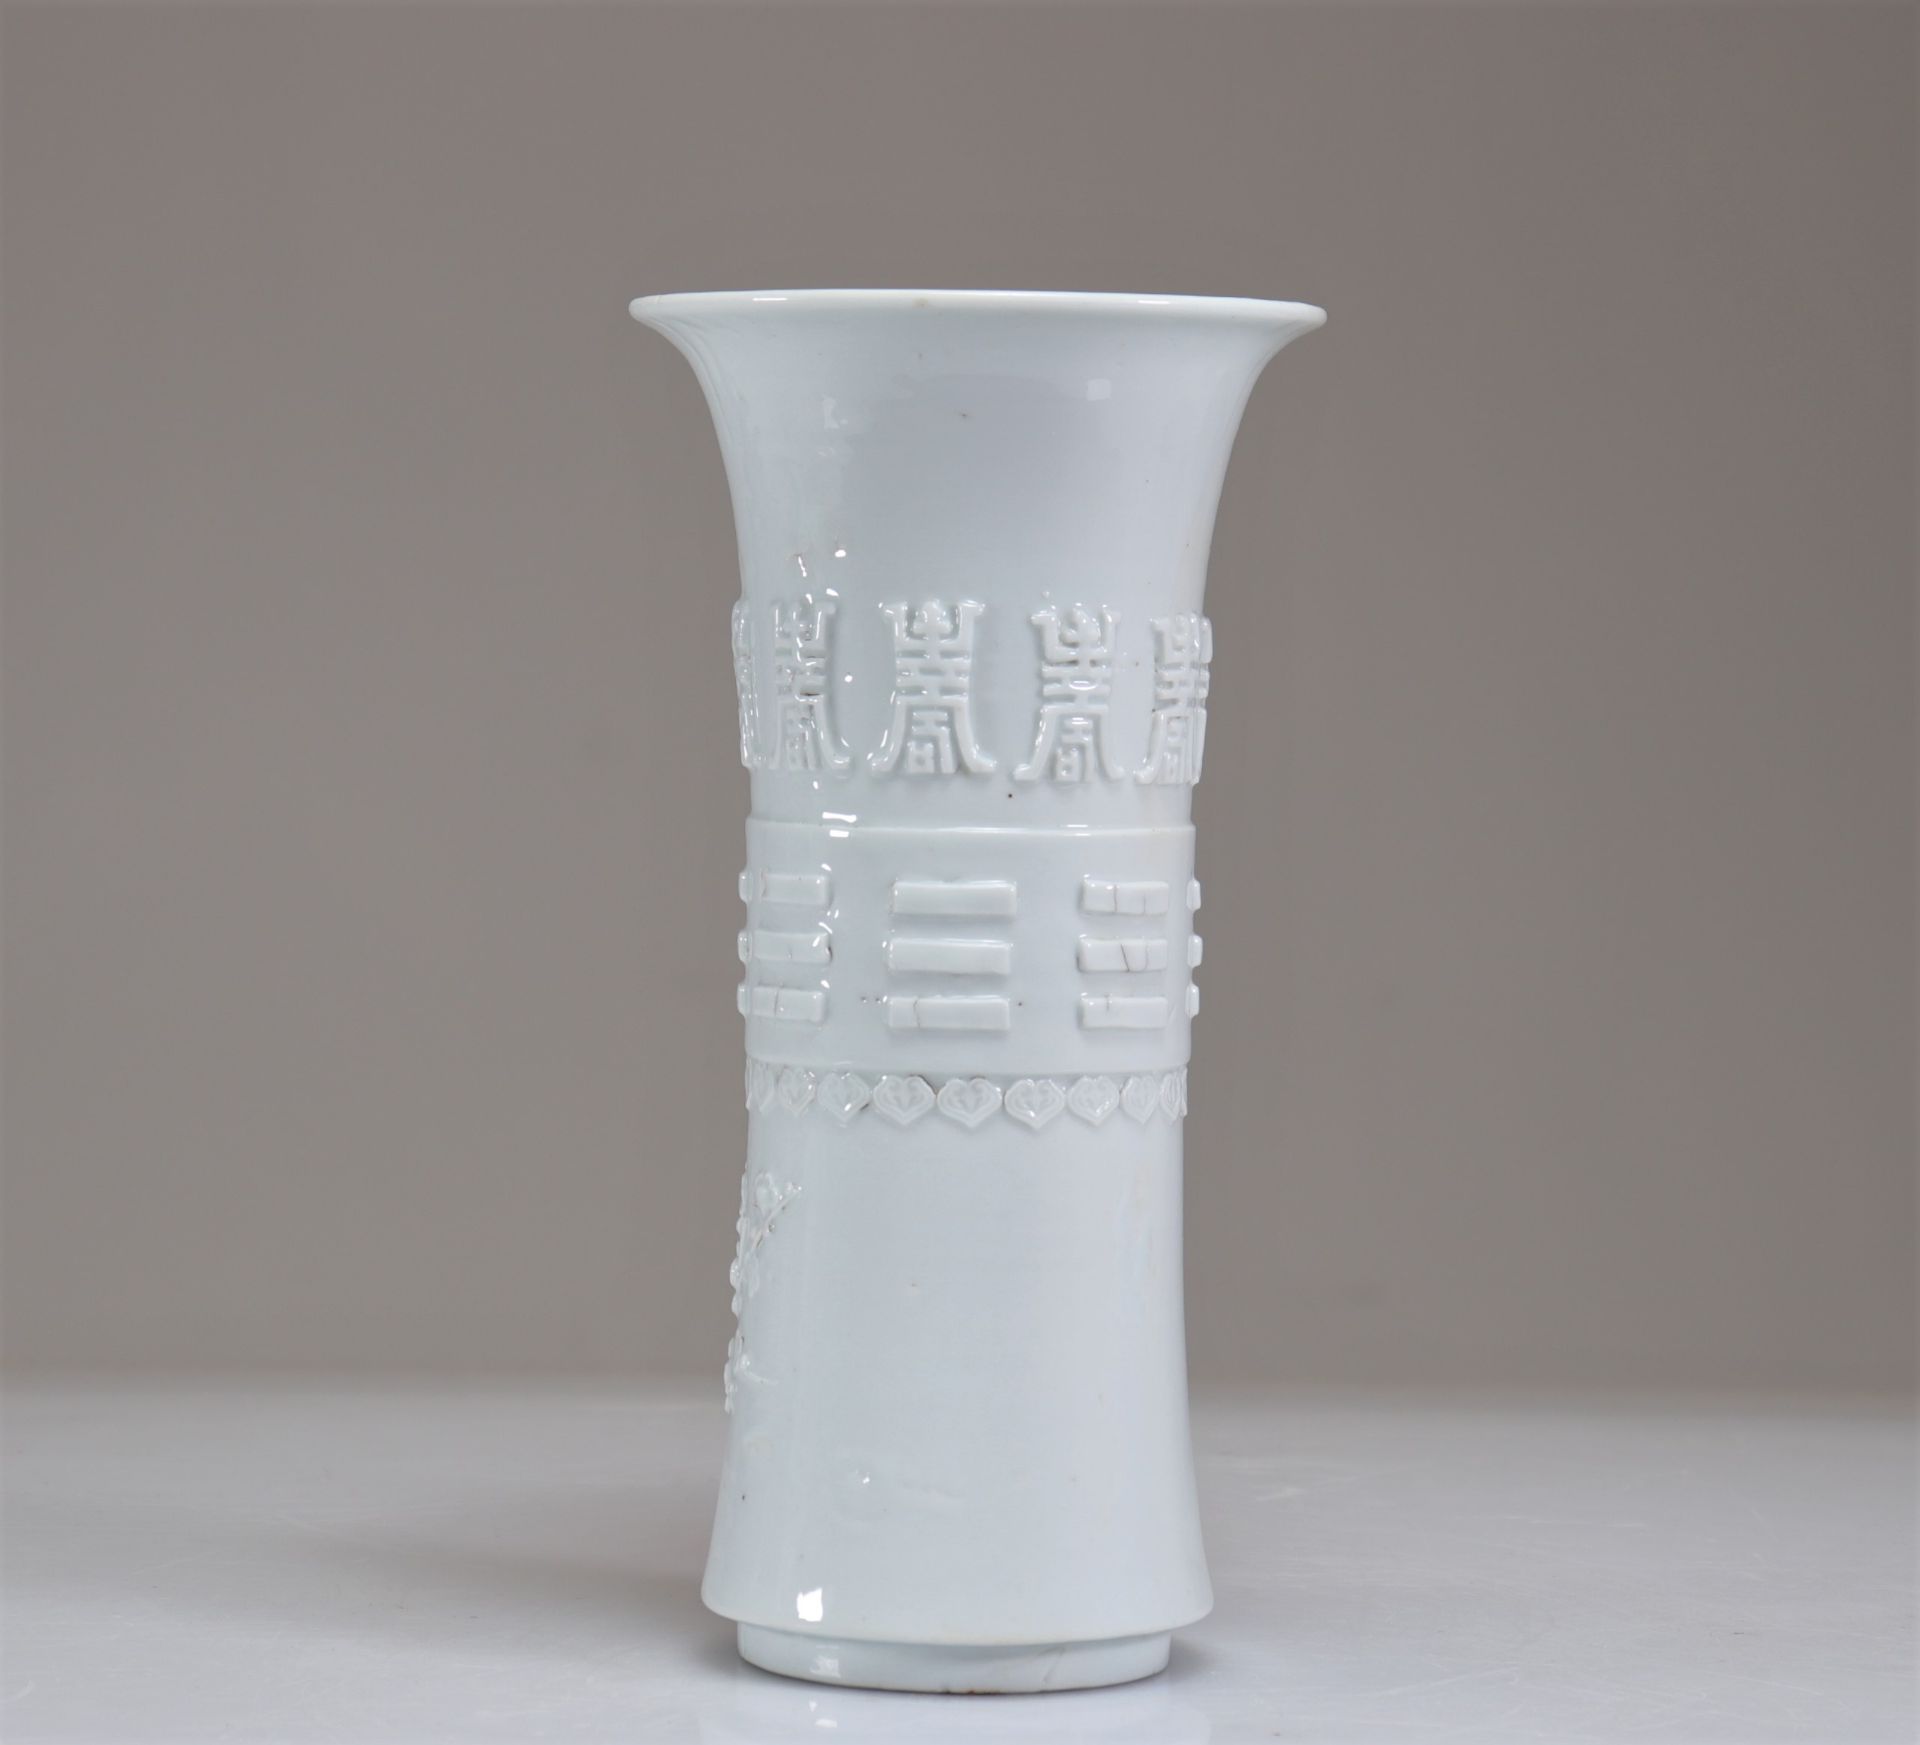 Rare white Gu-shaped vase decorated with characters from Qing period, 18th century - Bild 2 aus 5